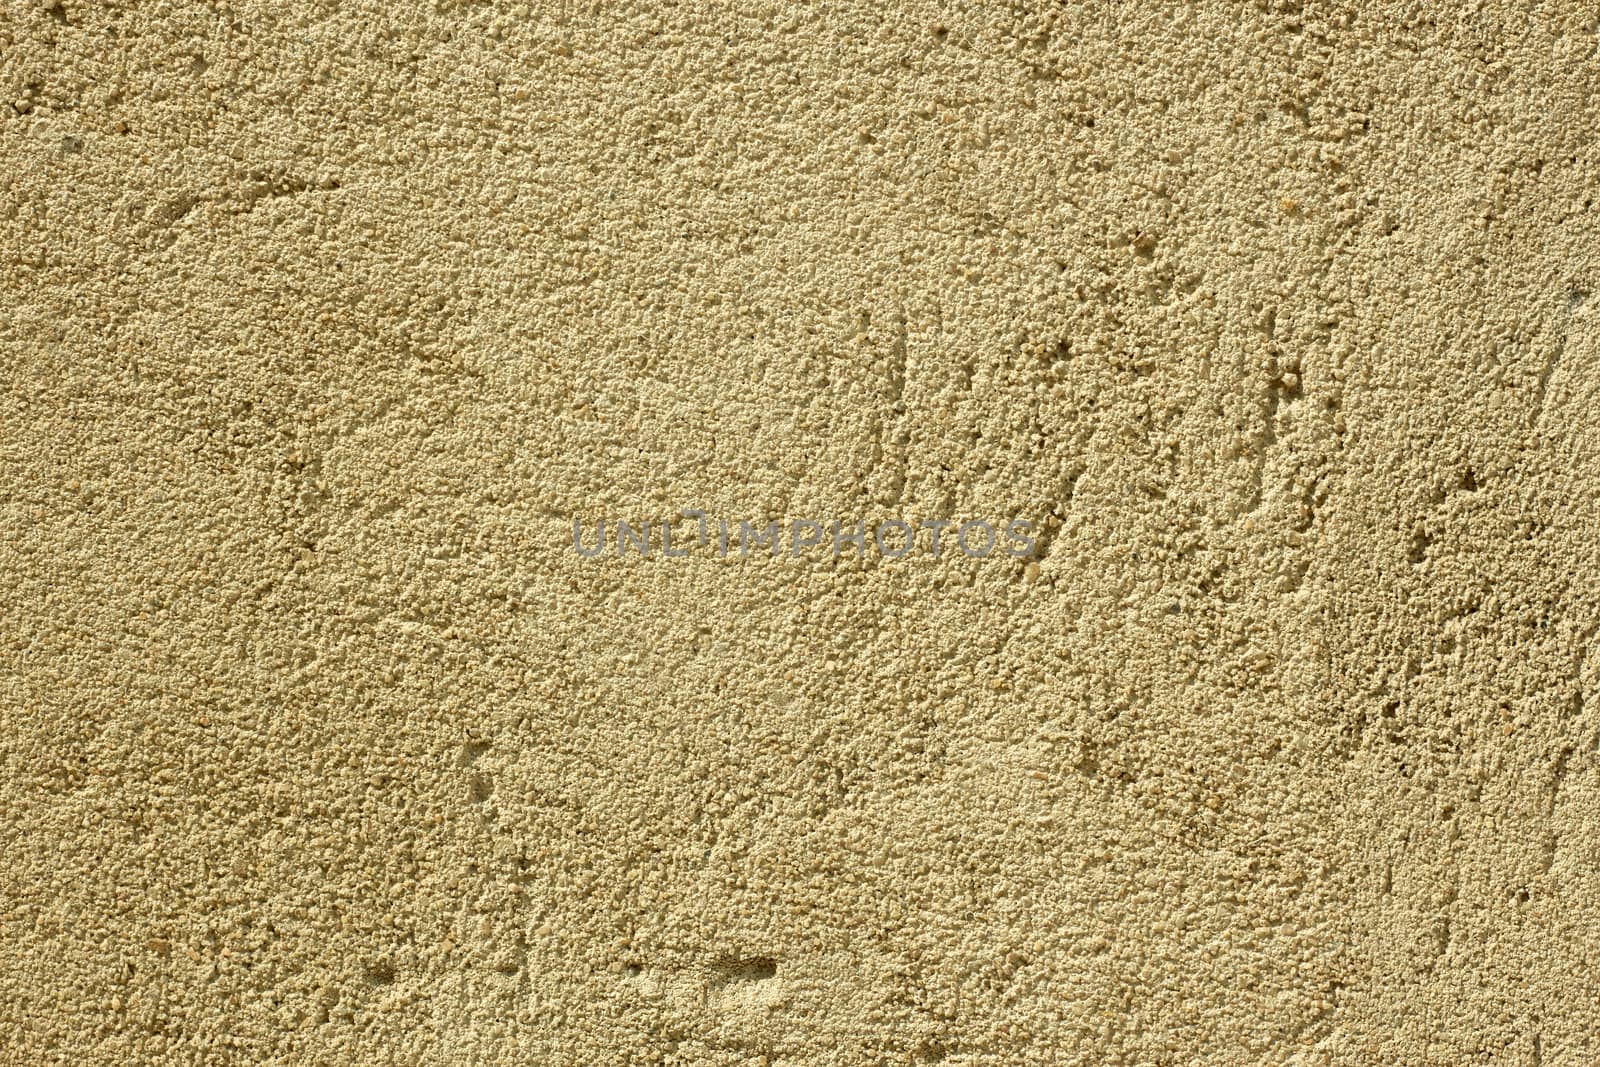 New stucco with fine sand close up by qiiip